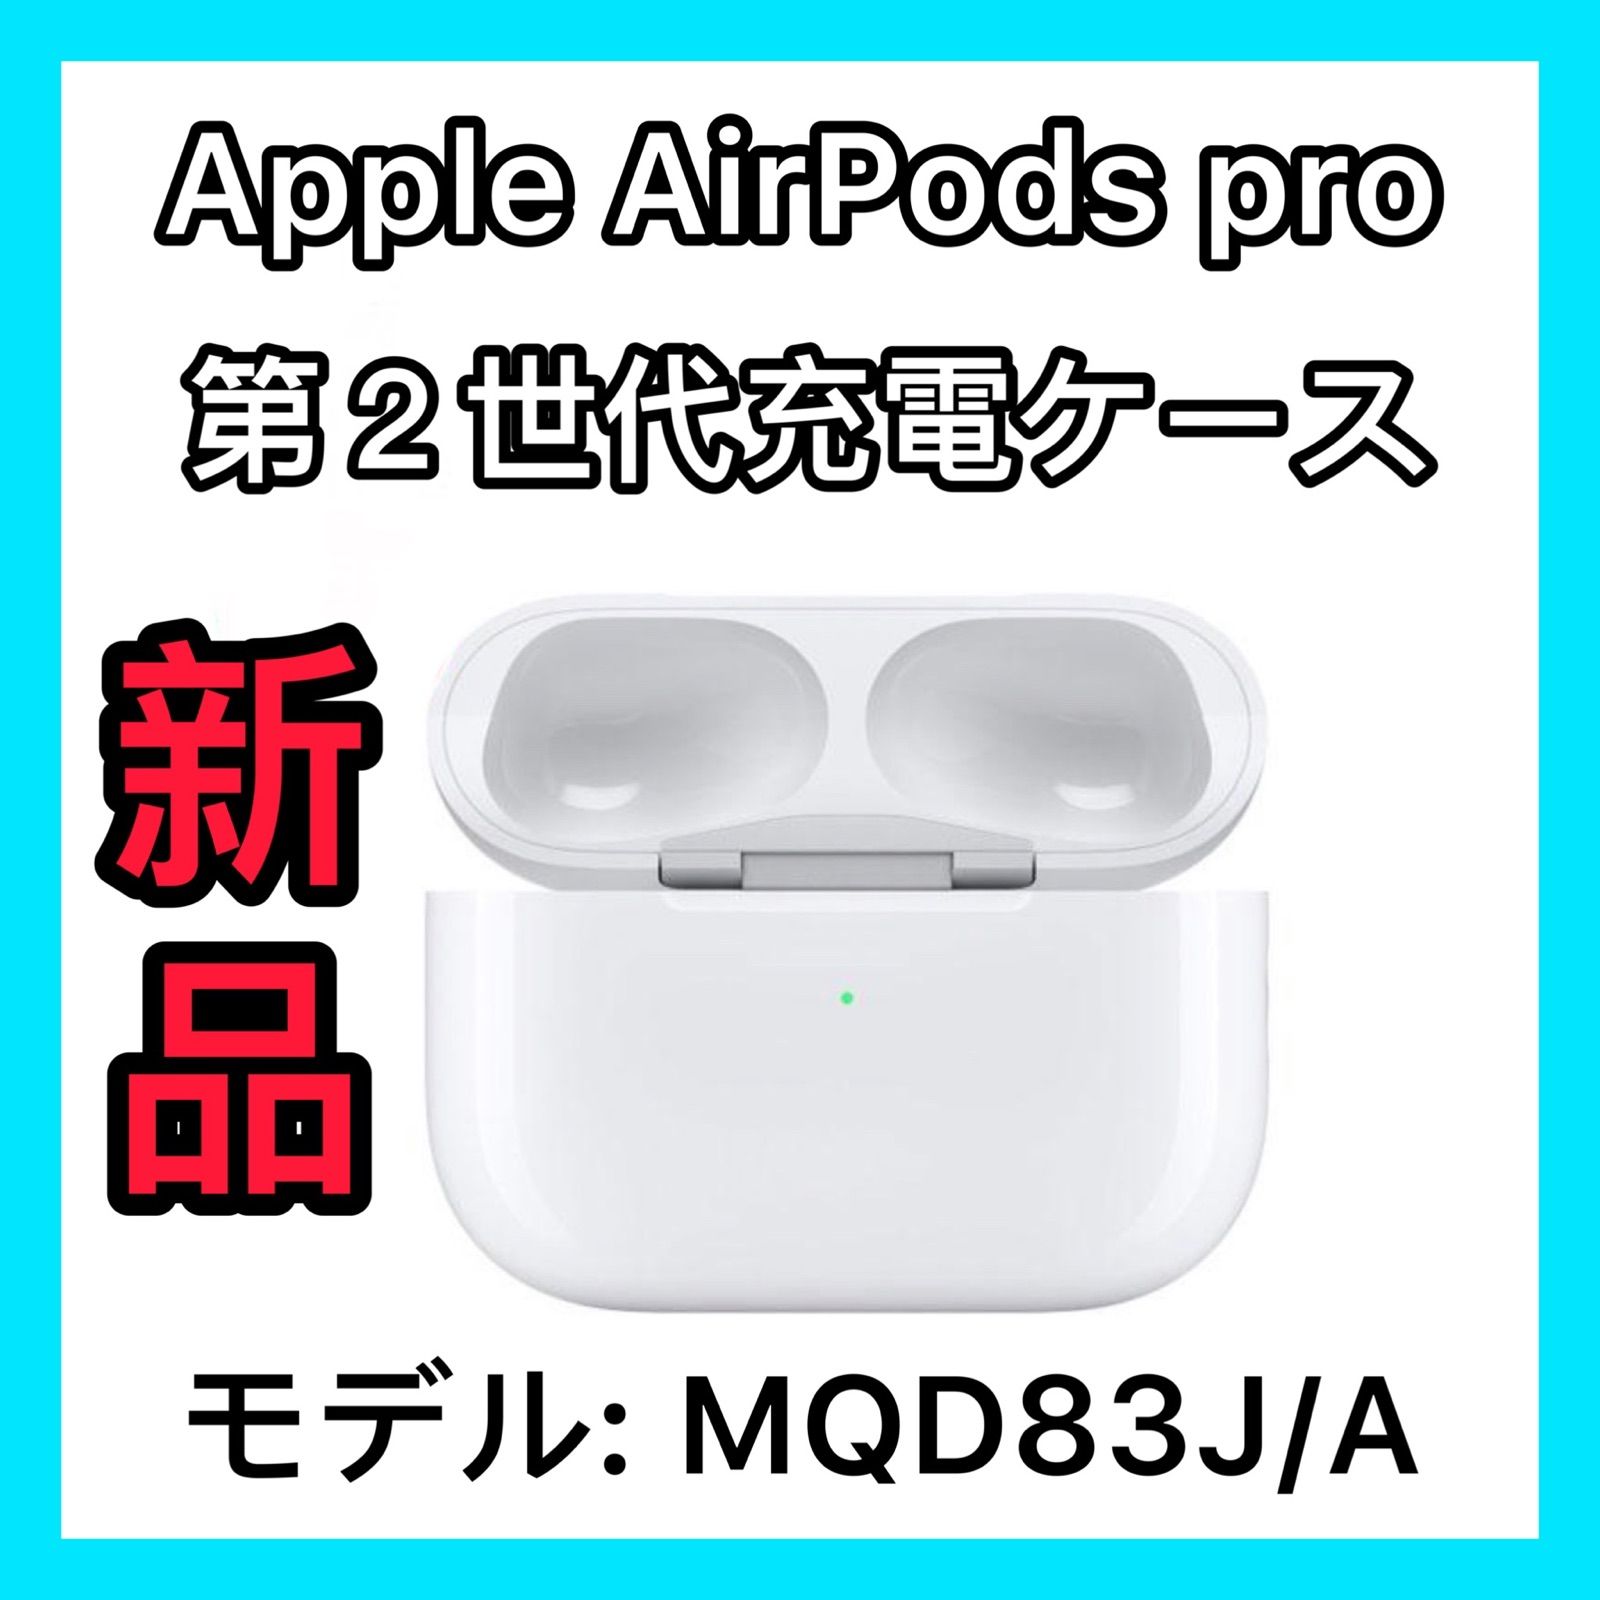 Apple  AirPods pro 充電ケース 正規品　エアーポッズ